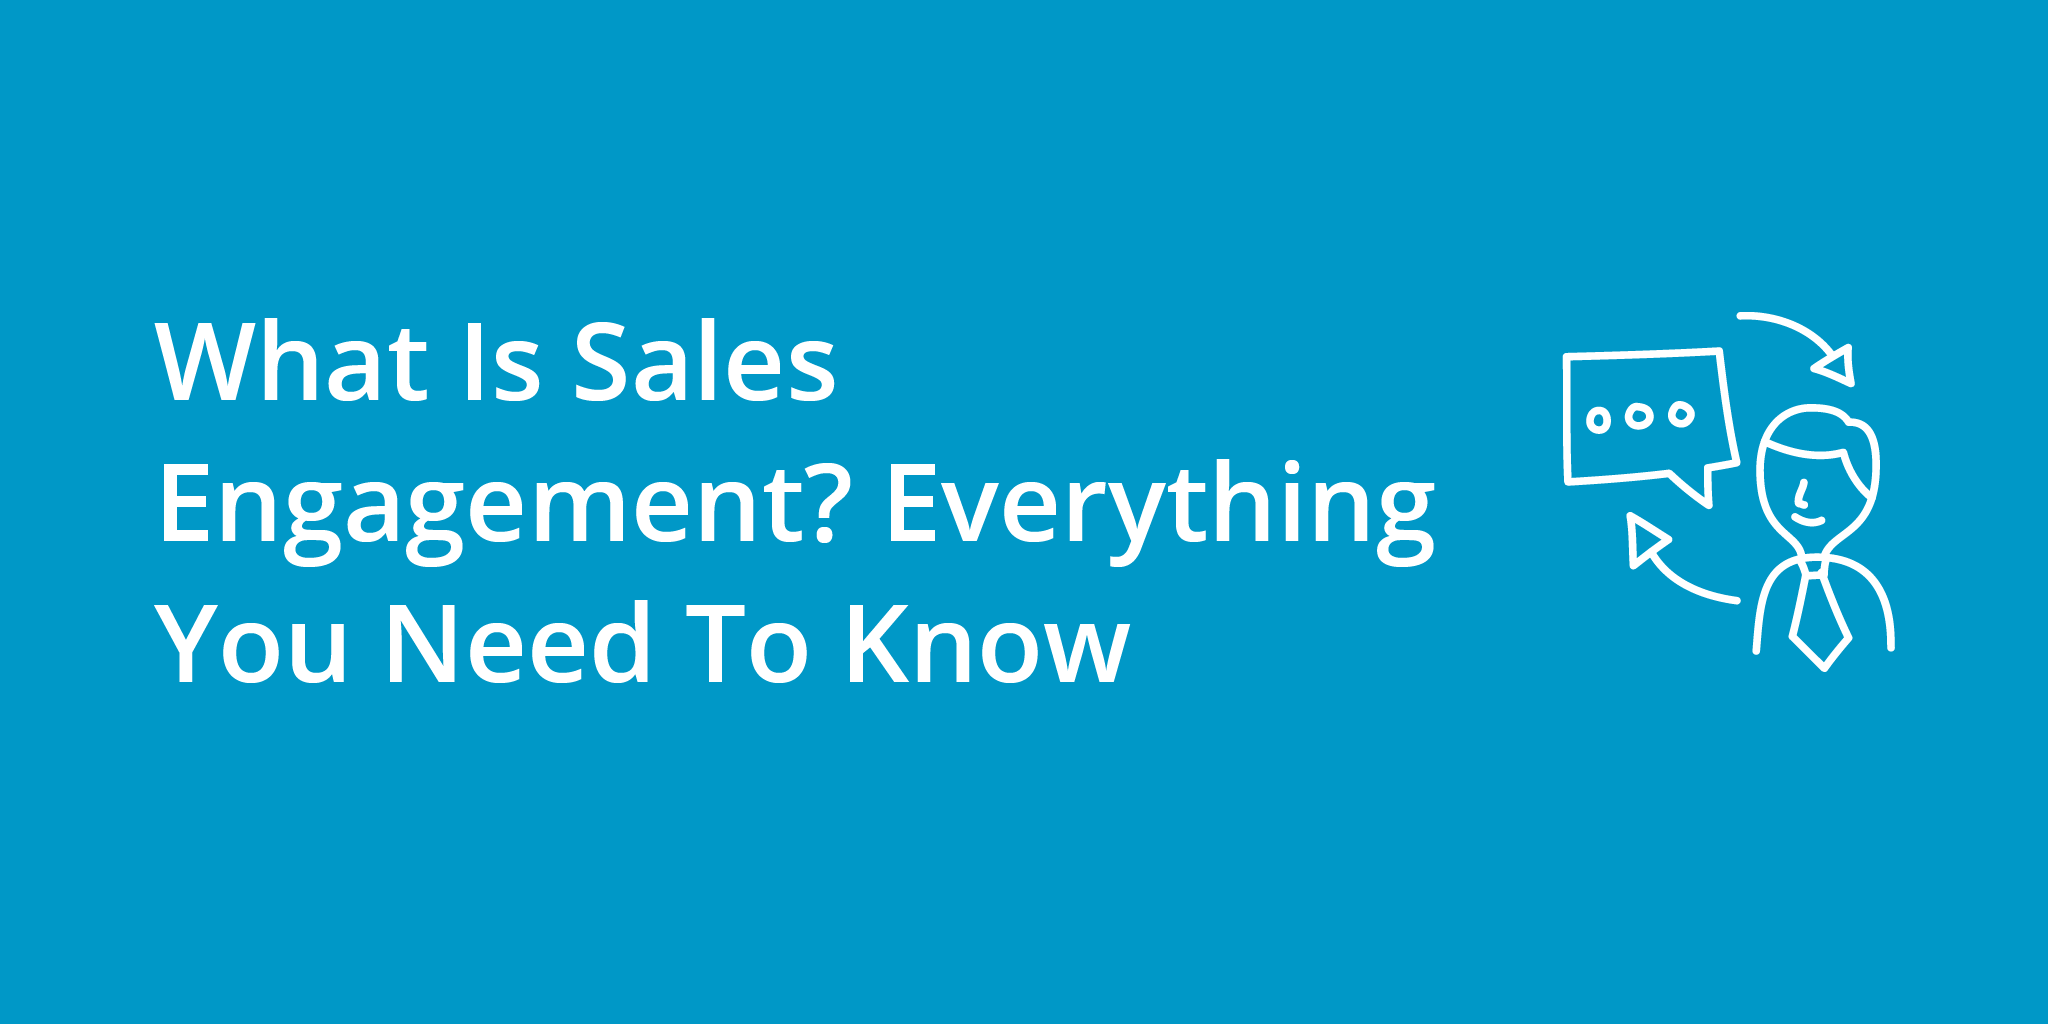 What Is Sales Engagement? Everything You Need To Know | Telephones for business